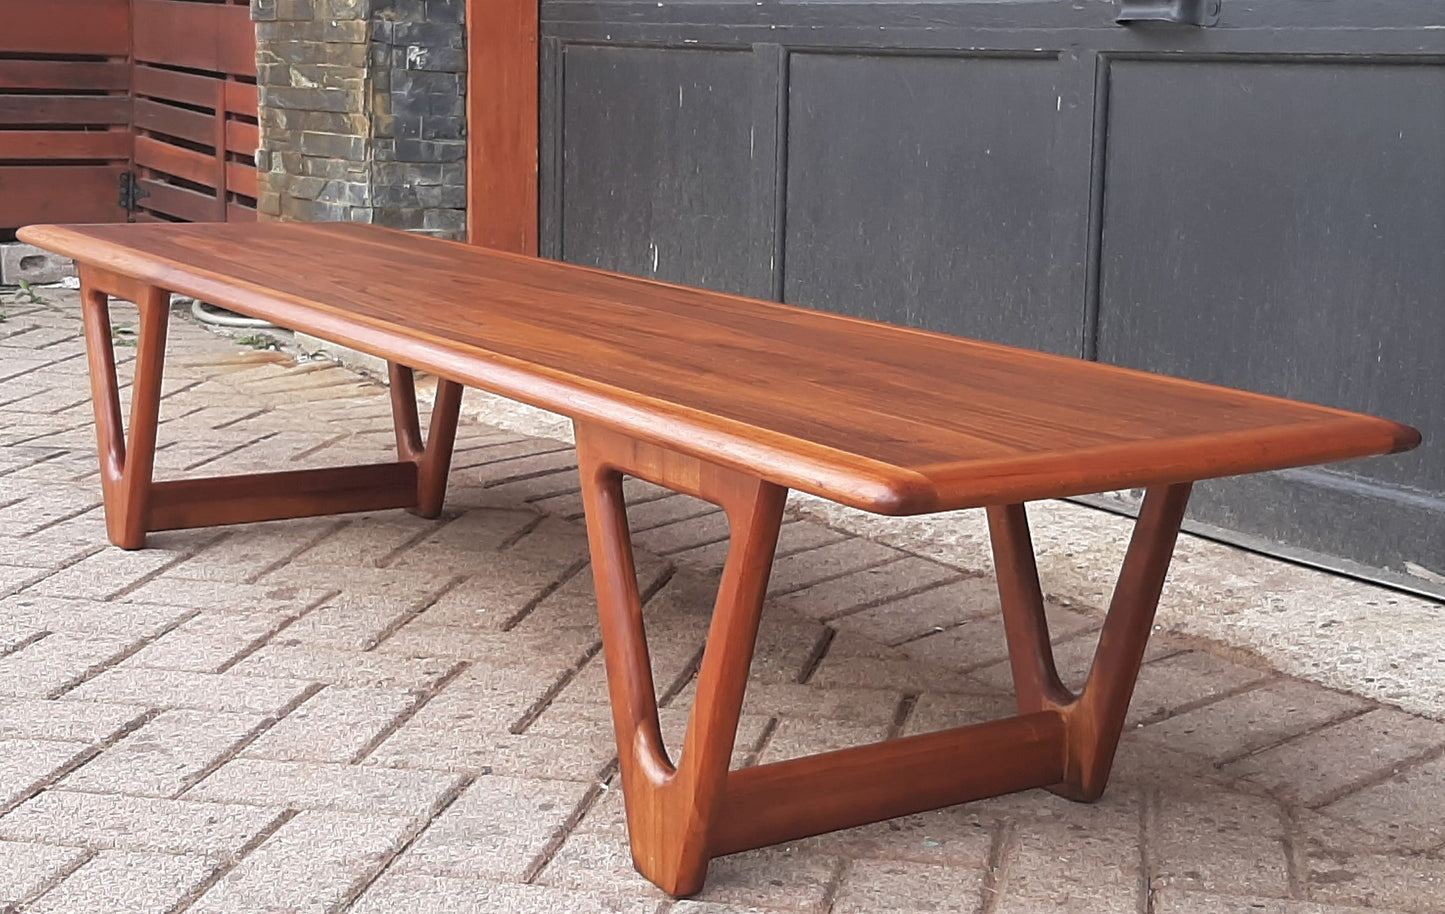 REFINISHED MCM Walnut Coffee Table by Lane, PERFECT